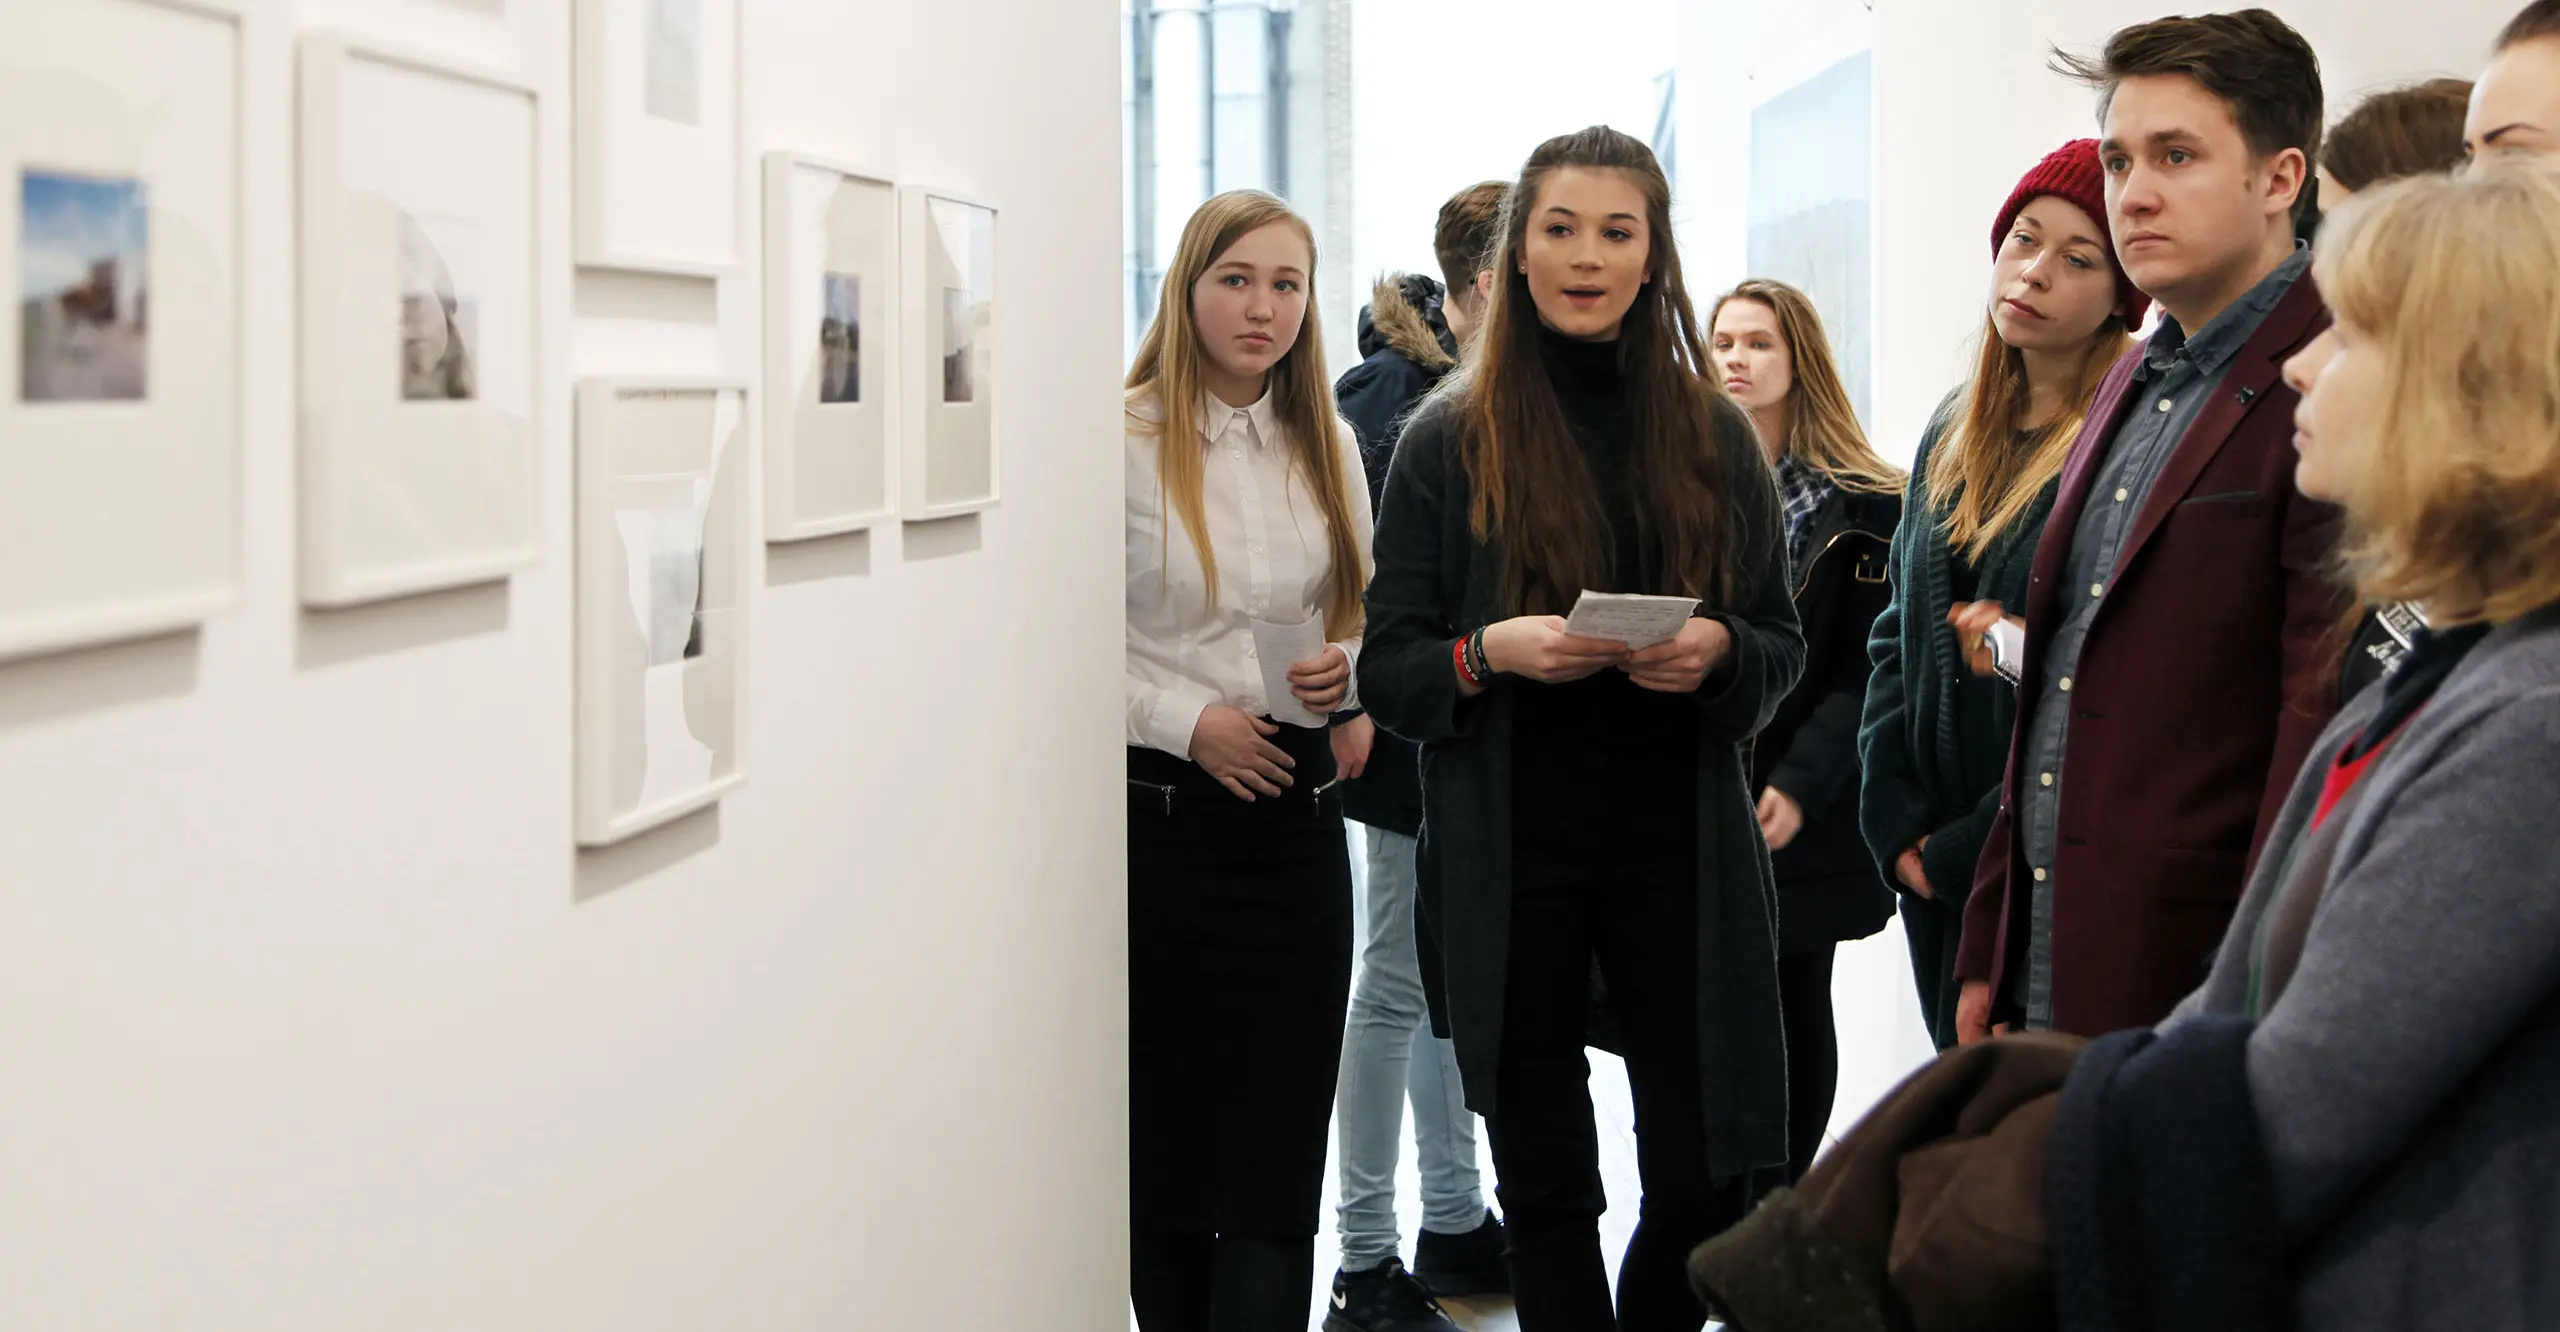 A photograph of a young person speaking to a group of people in a gallery.